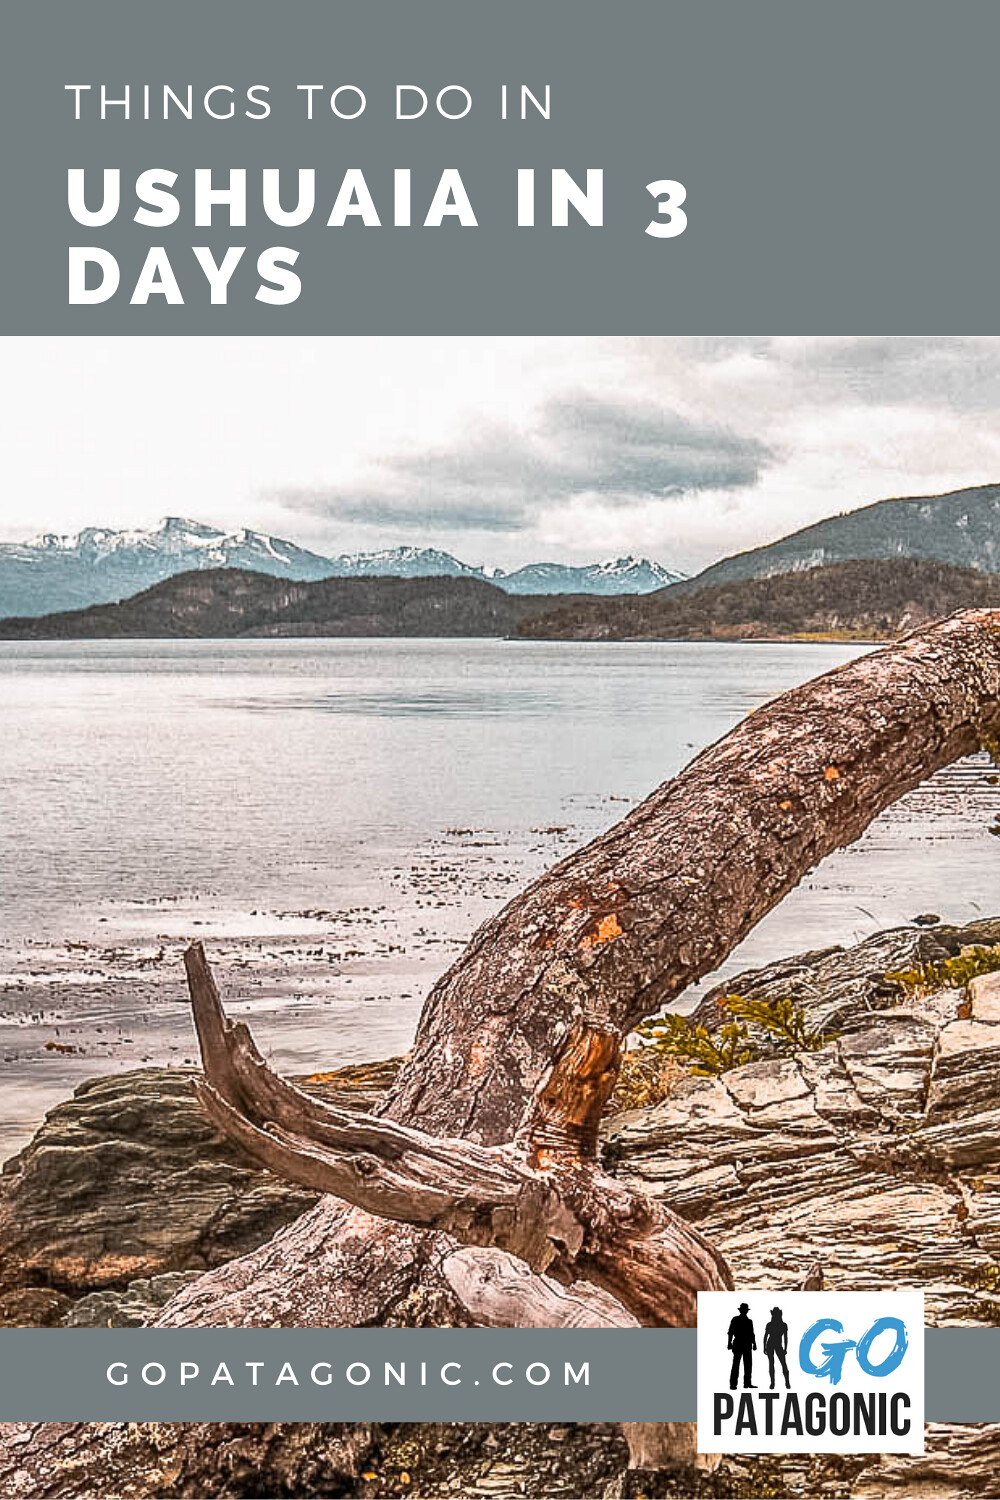 Ushuaia in 3 days, suggested itinerary